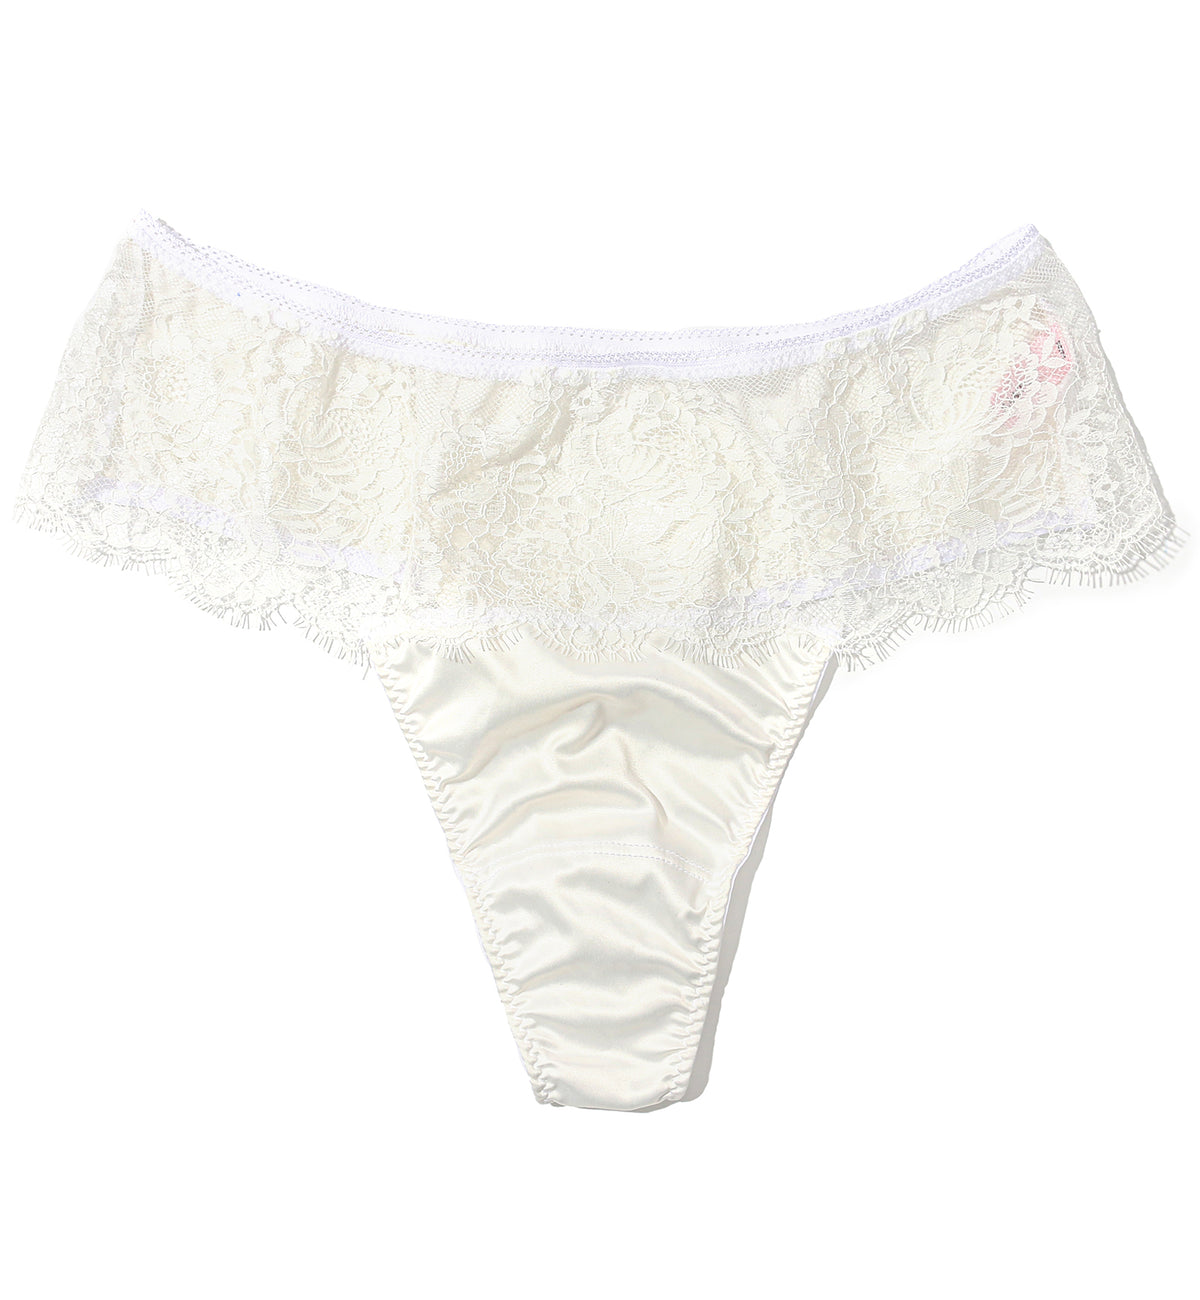 Hanky Panky Bridal Happily Ever After Retro Thong (4R1931),XS,Light Ivory - Light Ivory,XS